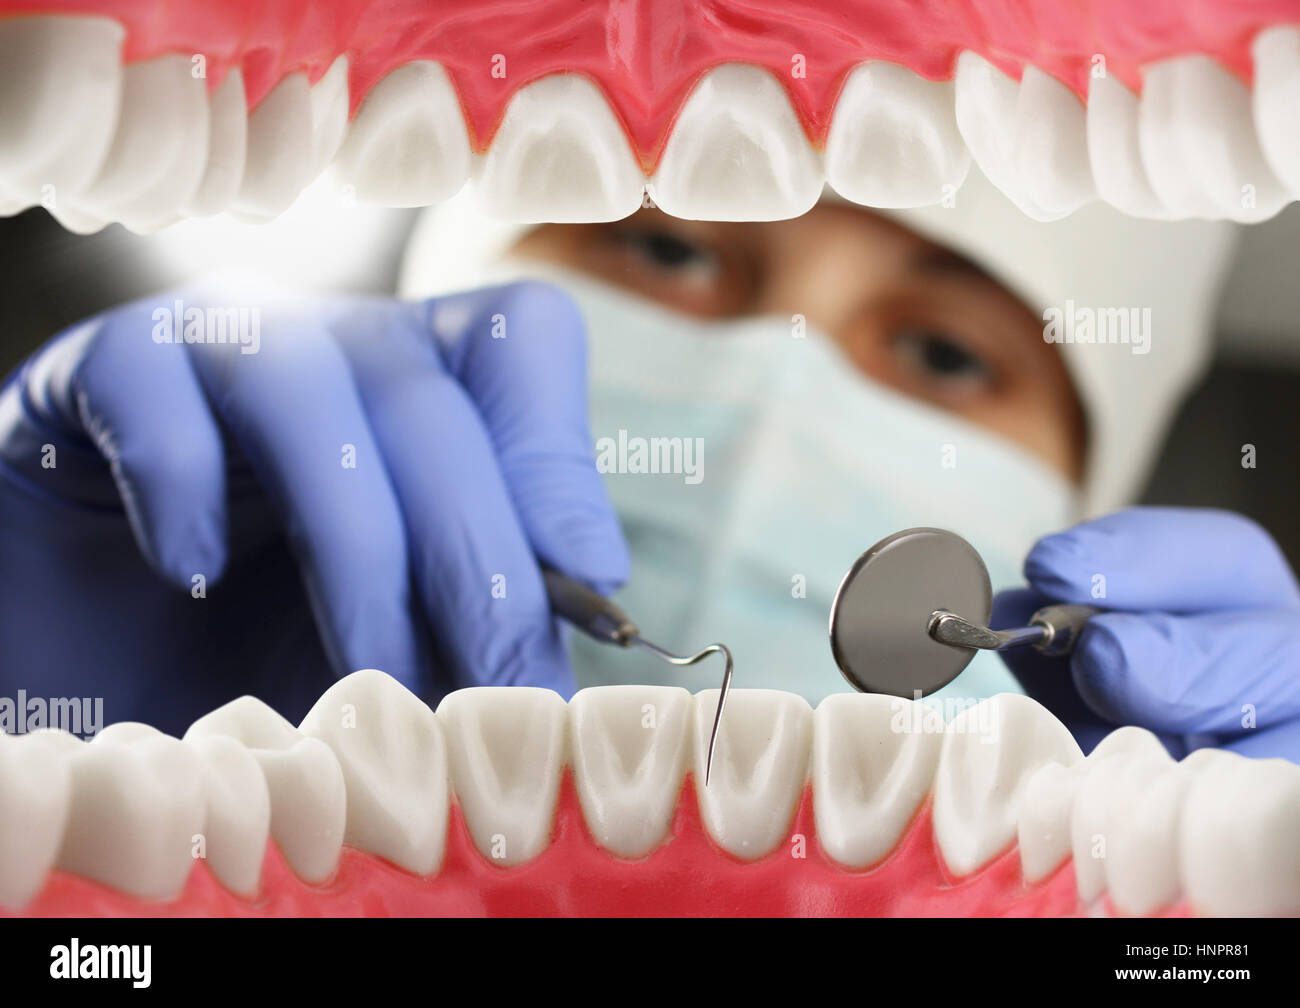 Dentist examining teeth, Inside mouth view. Soft focus Stock Photo